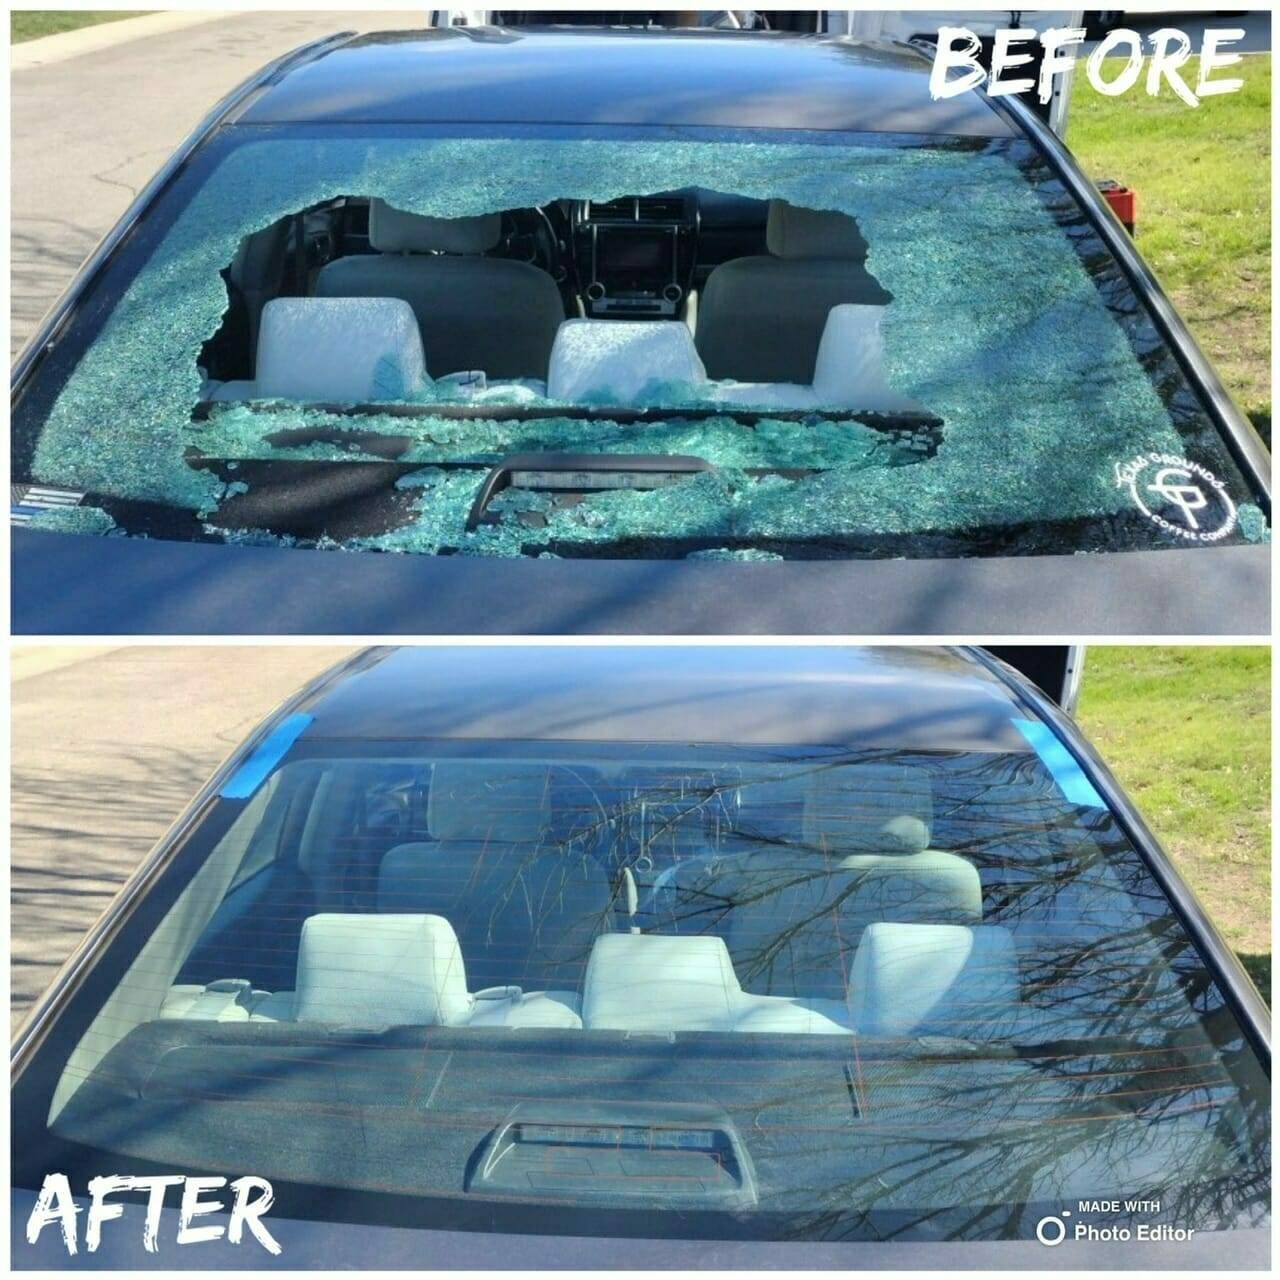 A split image showcasing a before-and-after view of a sedan's rear windshield in Leon Valley, Texas. The top half displays the initial damage caused by vandalism, with a smashed rear windshield. The bottom half shows the repaired state of the back glass after a home auto glass appointment.